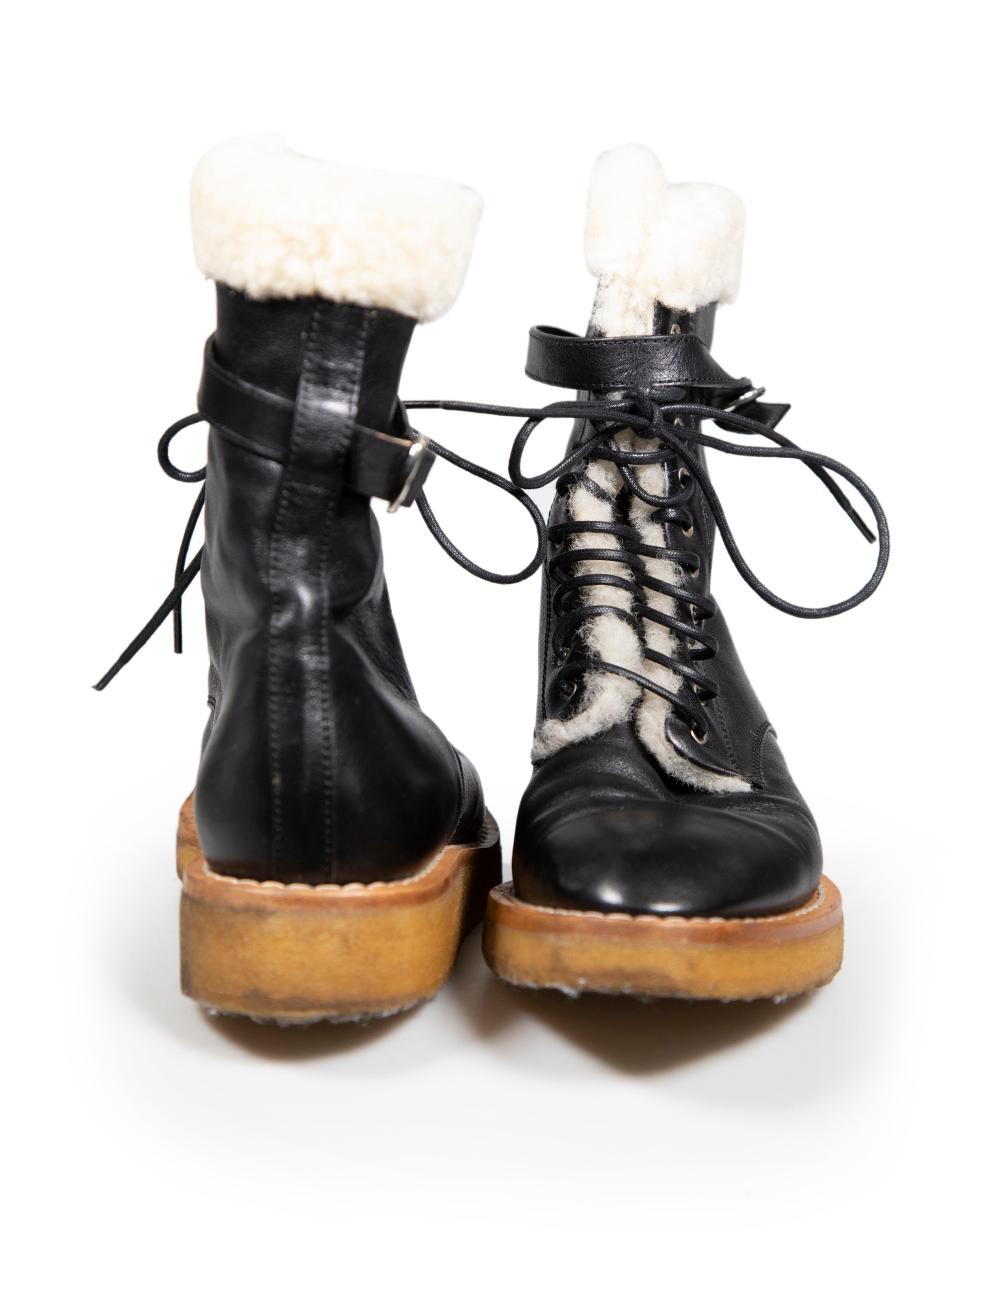 Céline Black Leather Manon Shearling Biker Boots Size IT 36 In Good Condition For Sale In London, GB